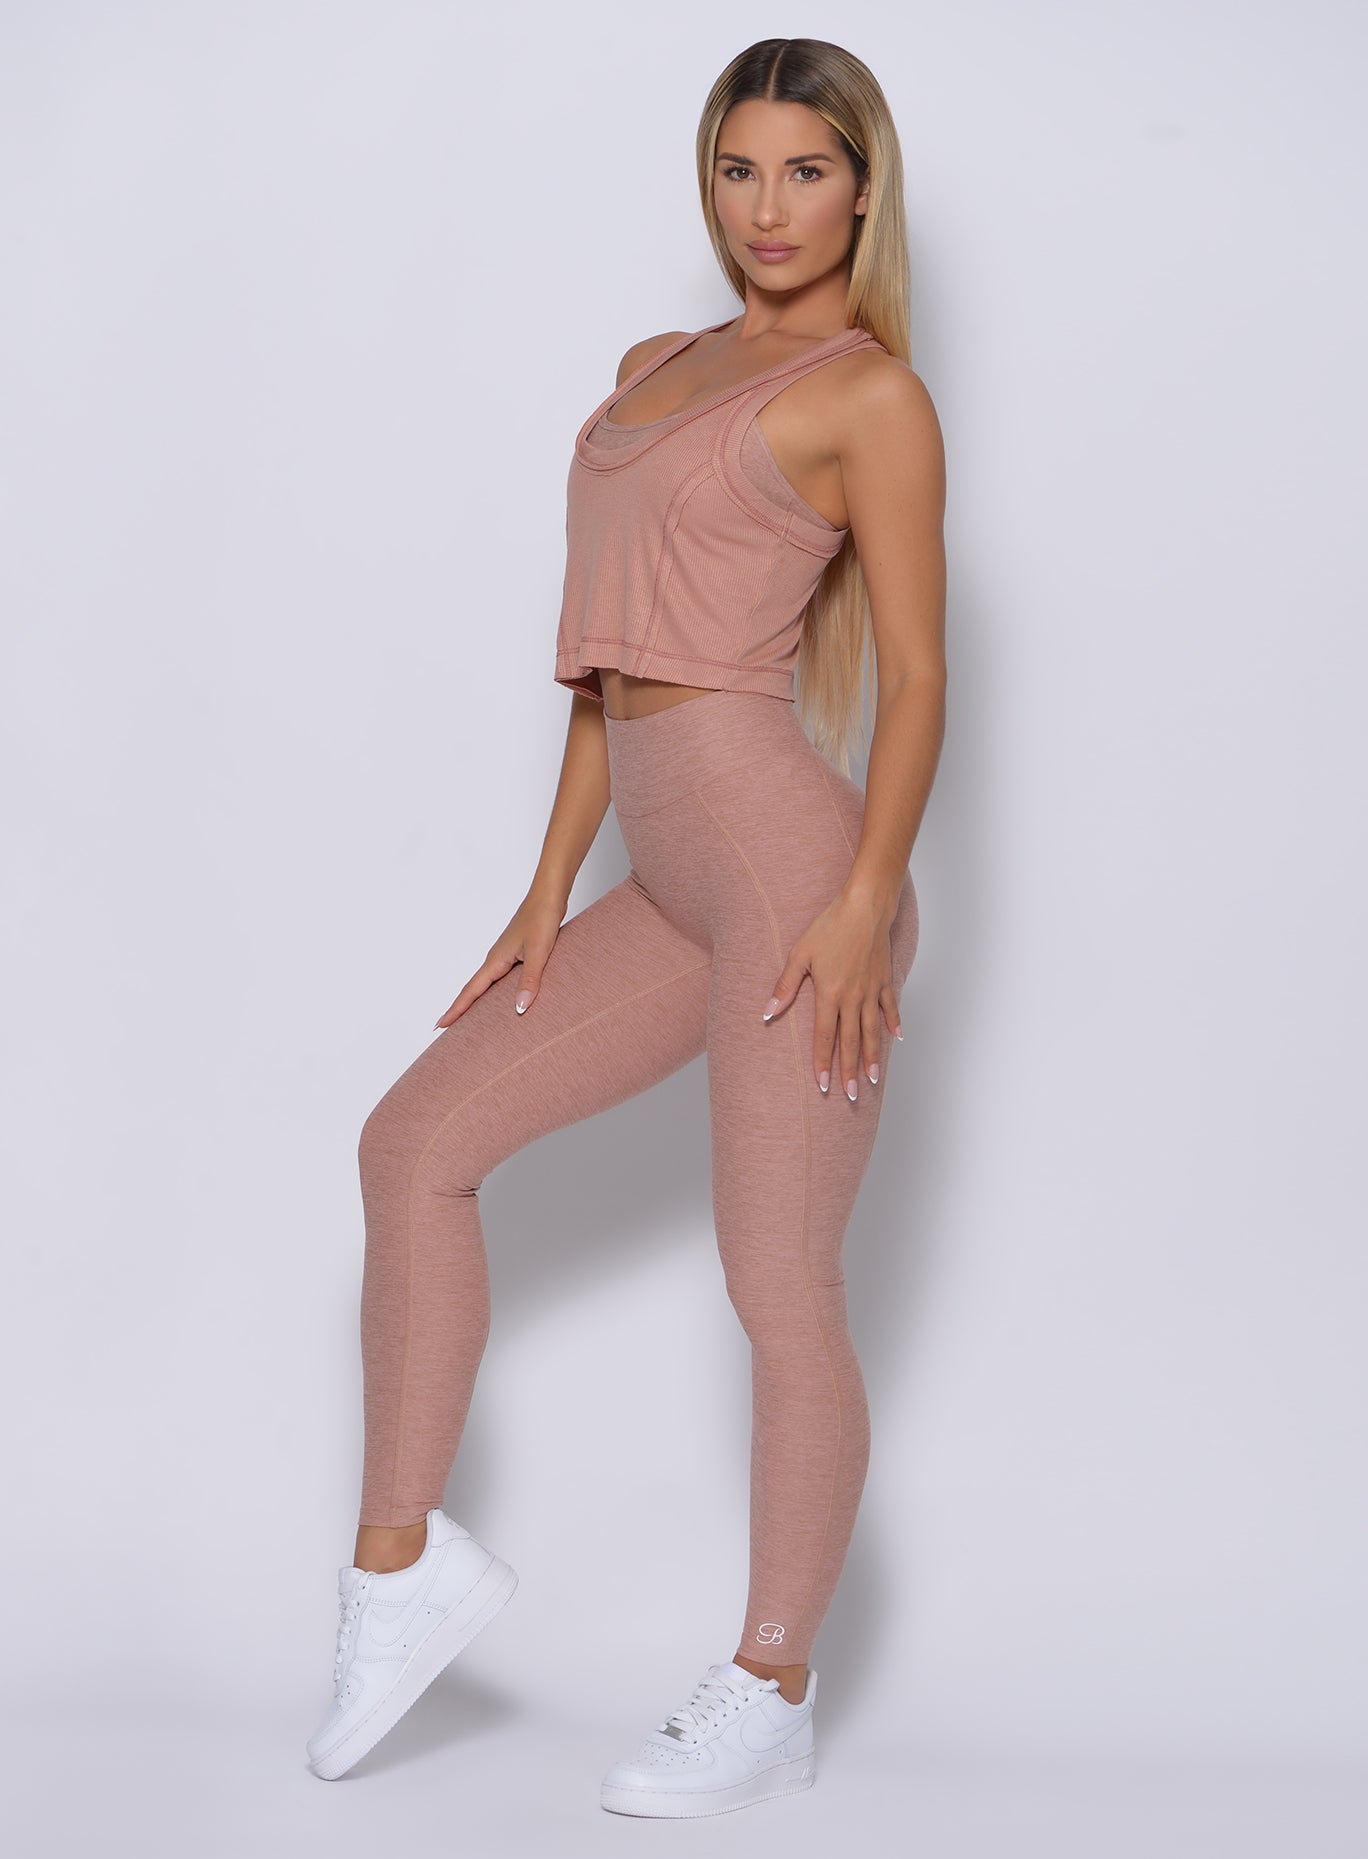 Left side profile view of a model angled left wearing our rib crop tank in frappe color and a matching leggings